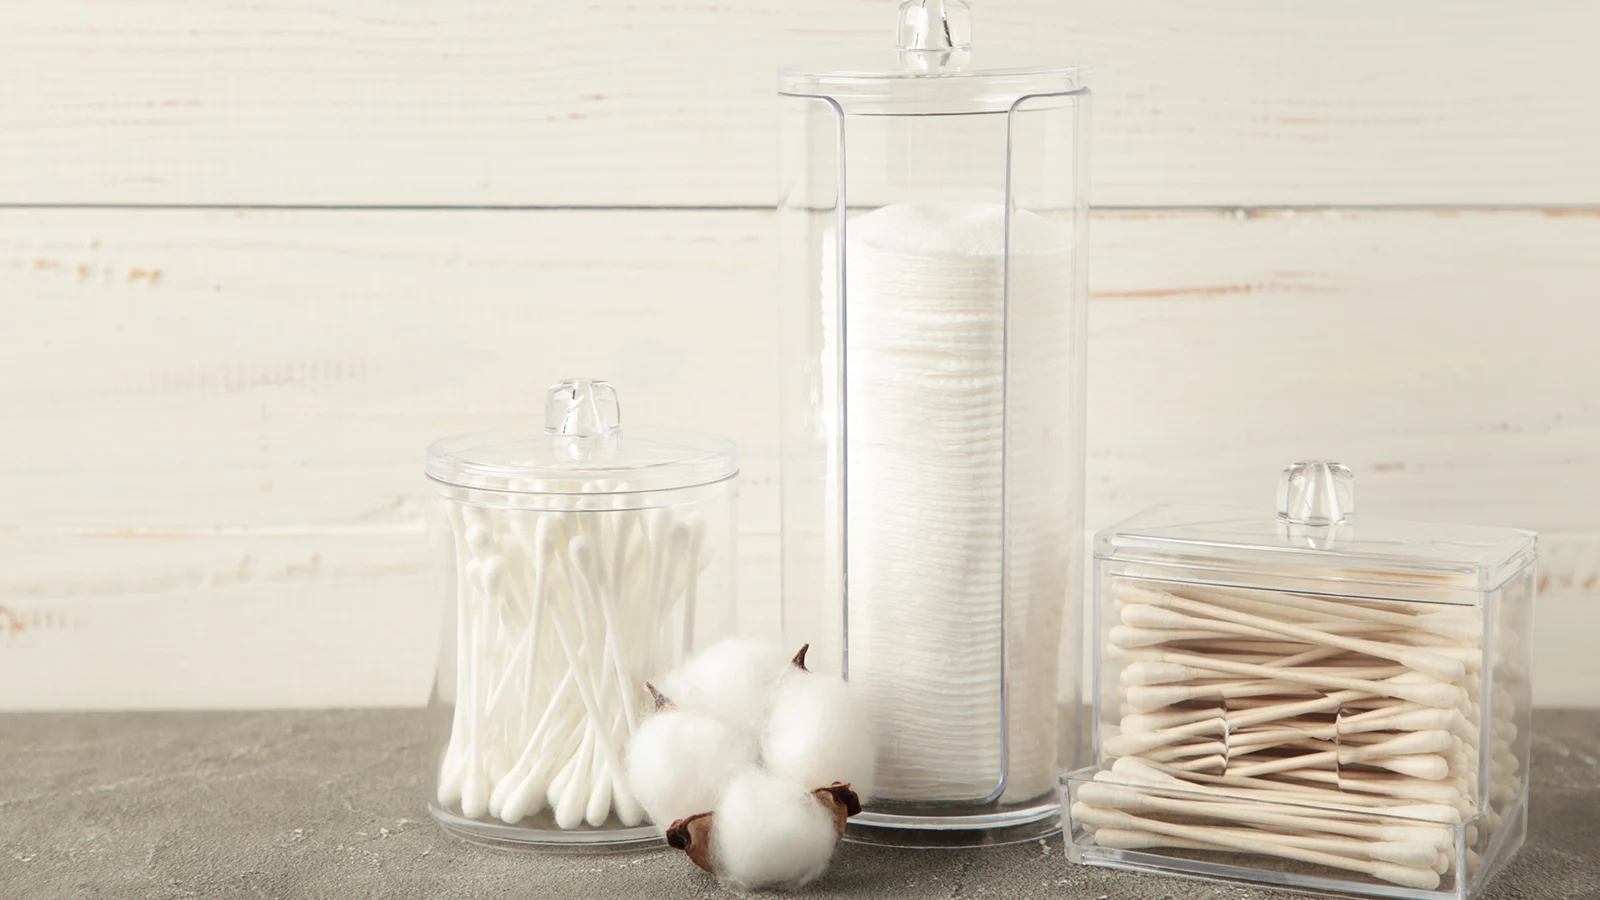 Small bathroom counter decorating ideas: clear jars with cotton swabs and cotton balls.